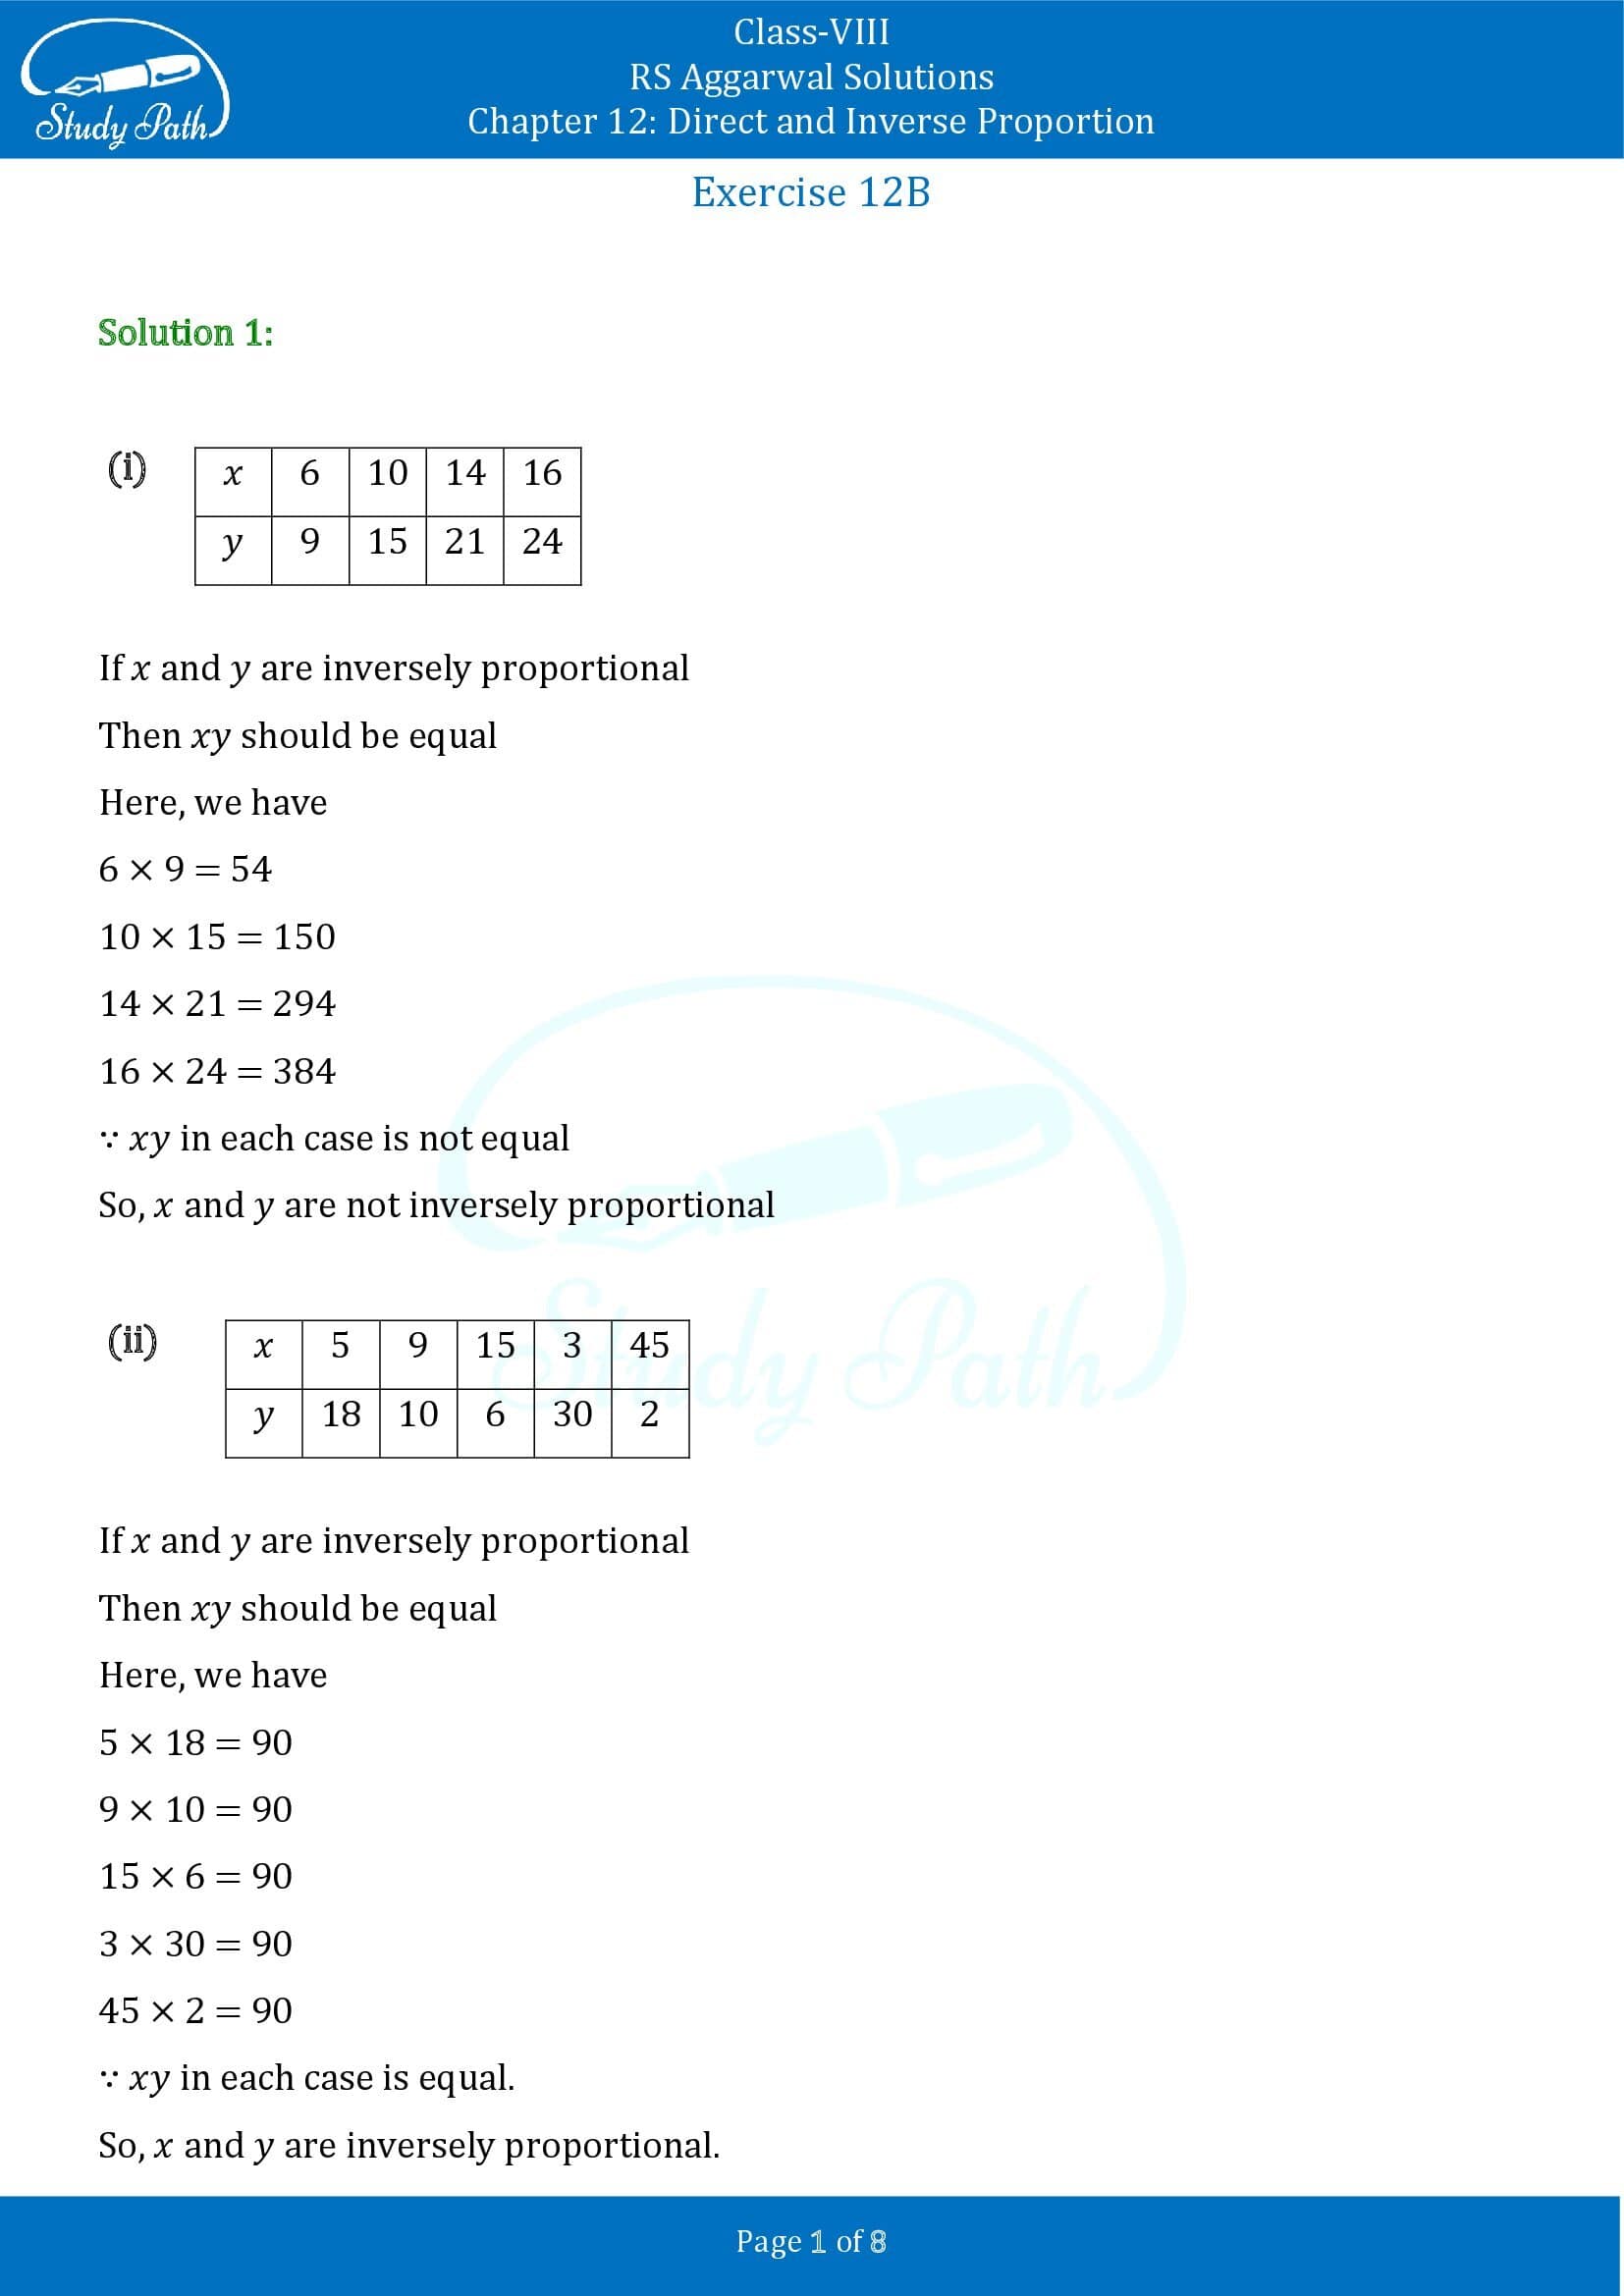 RS Aggarwal Solutions Class 8 Chapter 12 Direct and Inverse Proportion Exercise 12B 00001